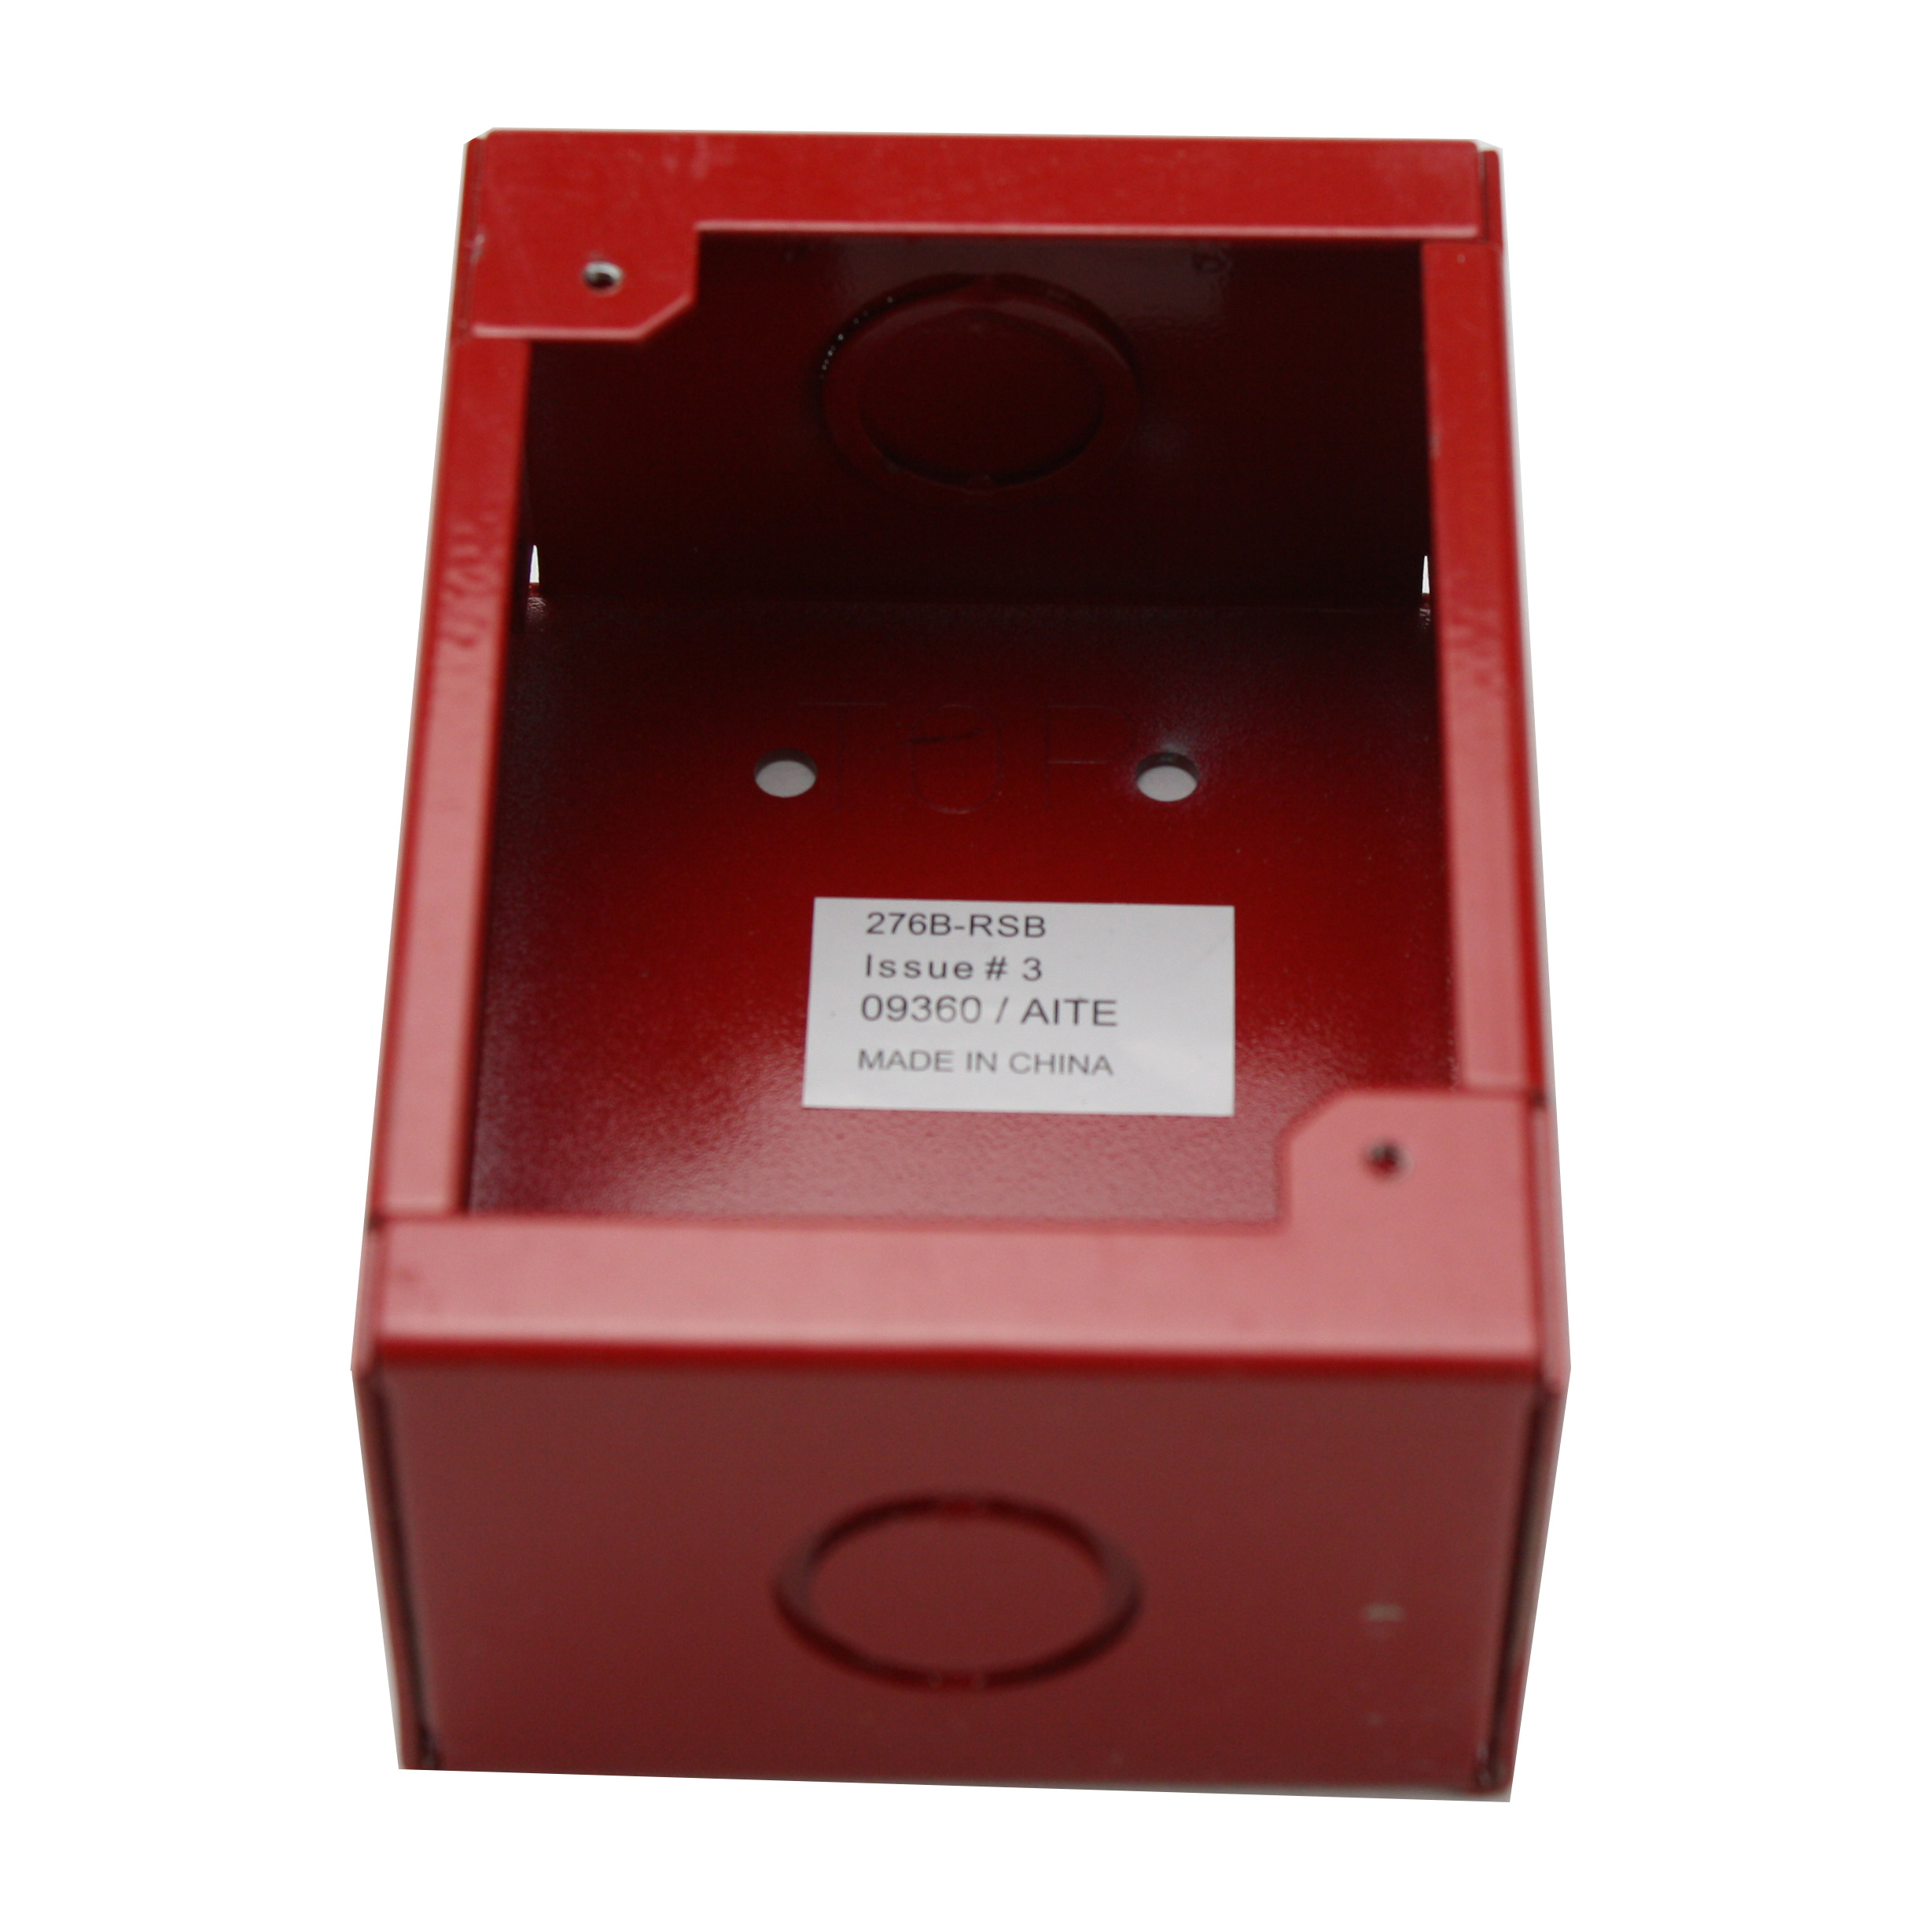 download red box fire alarm